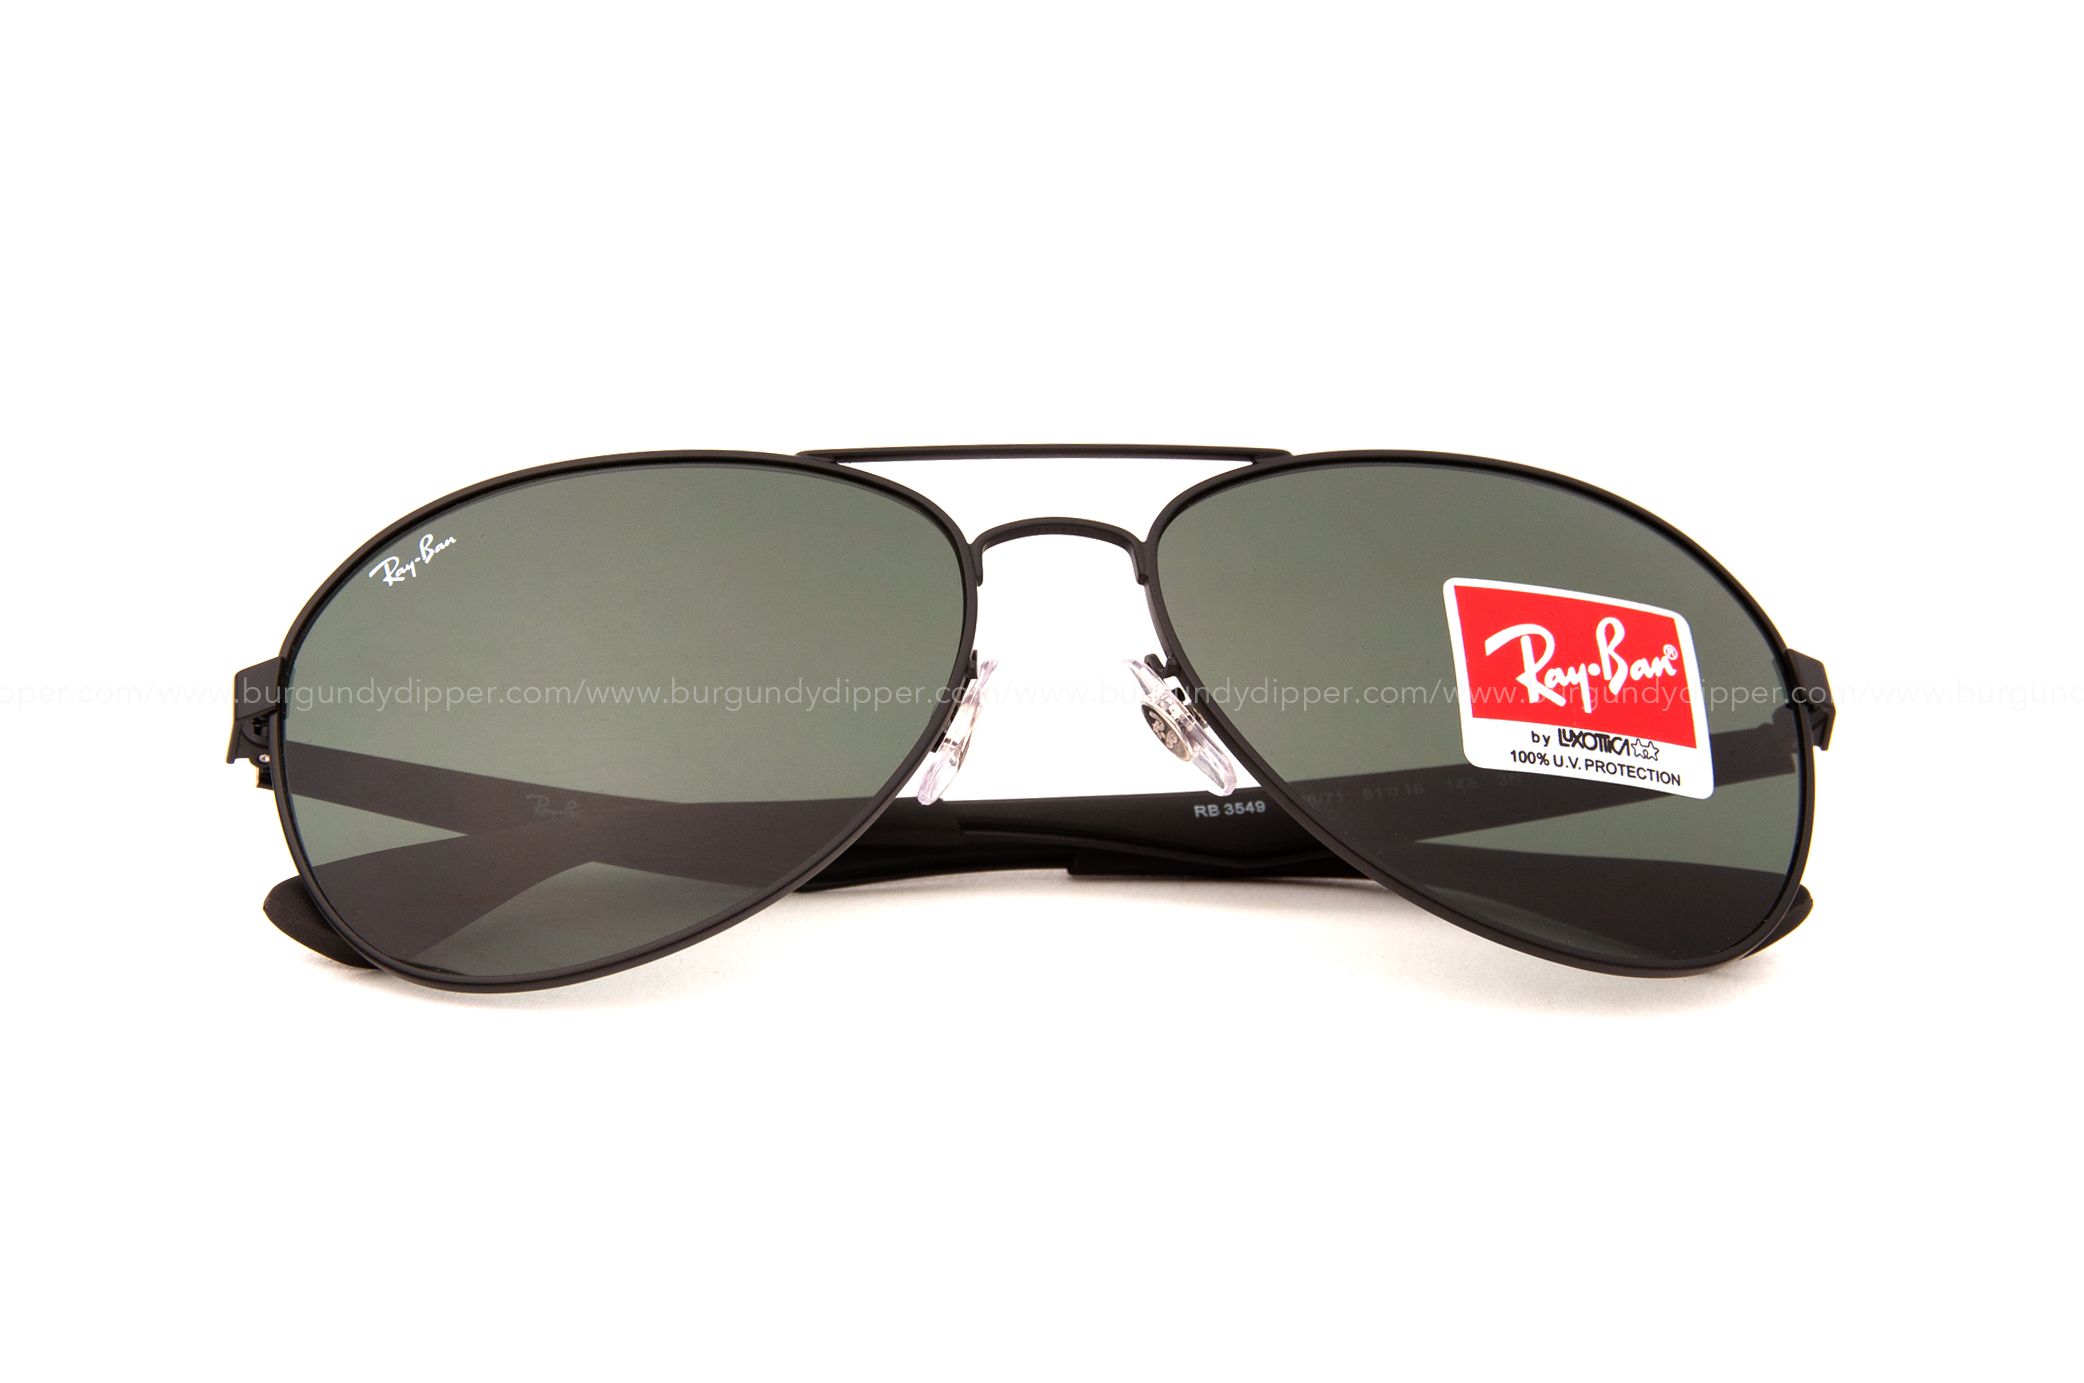 Ray-Ban RB3549 006/71 SIZE 61 MM. – Burgundy Dipper